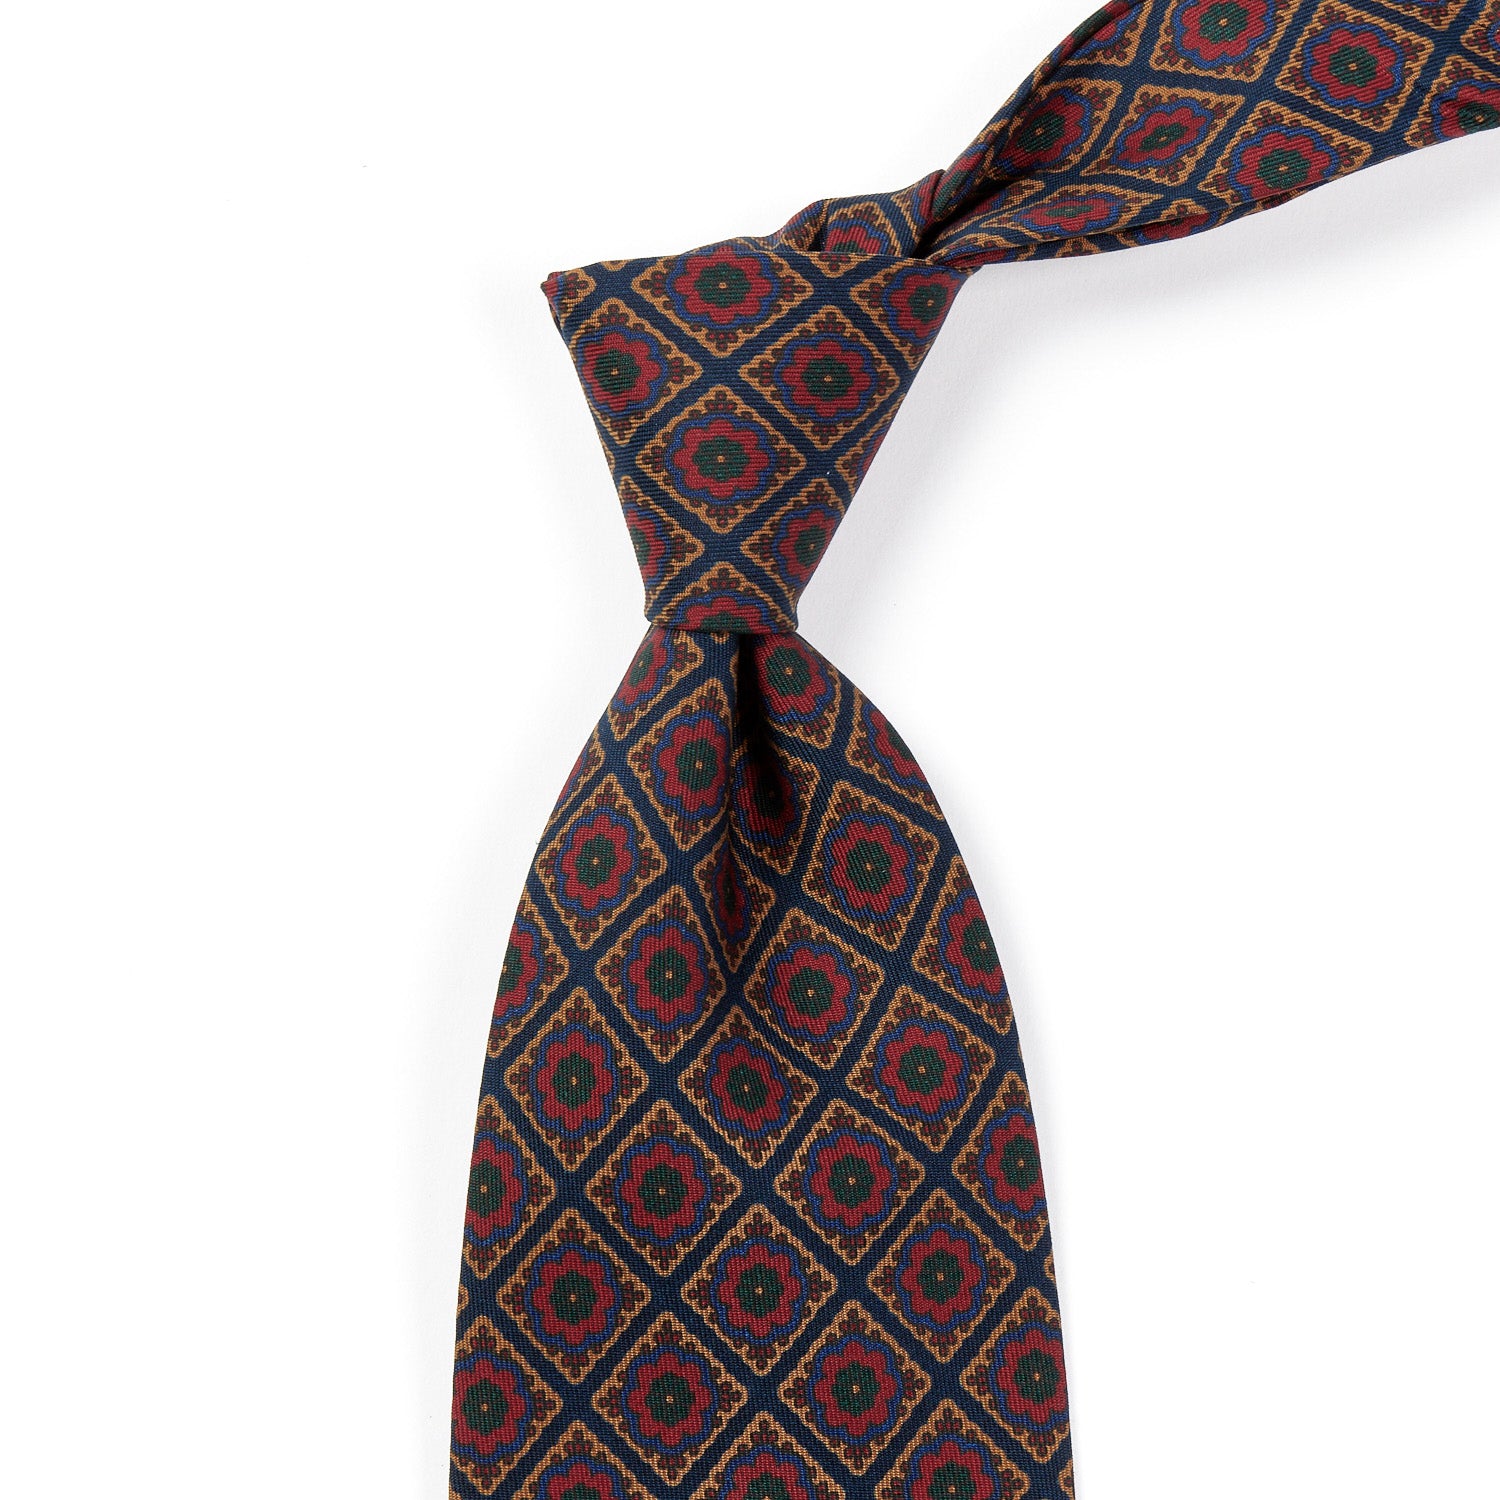 A Sovereign Grade Dark Navy/Red Oversized Medallion Ancient Madder Tie, crafted from 100% English silk by KirbyAllison.com.